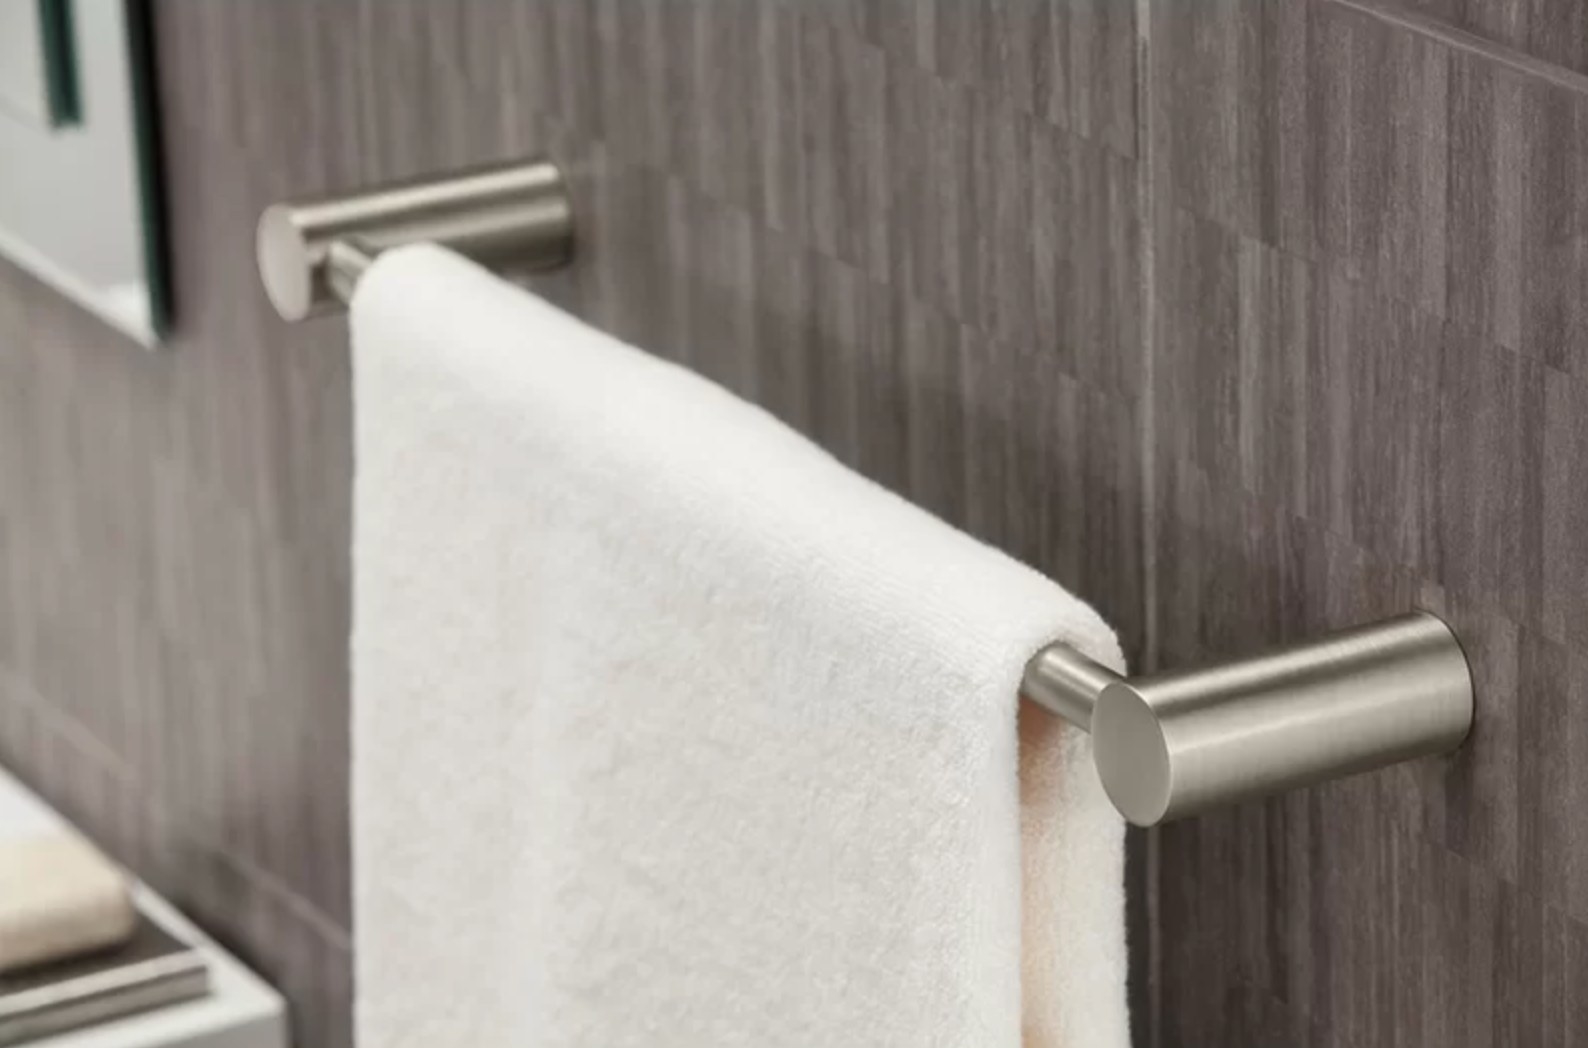 the brushed silver towel rack holding a white towel